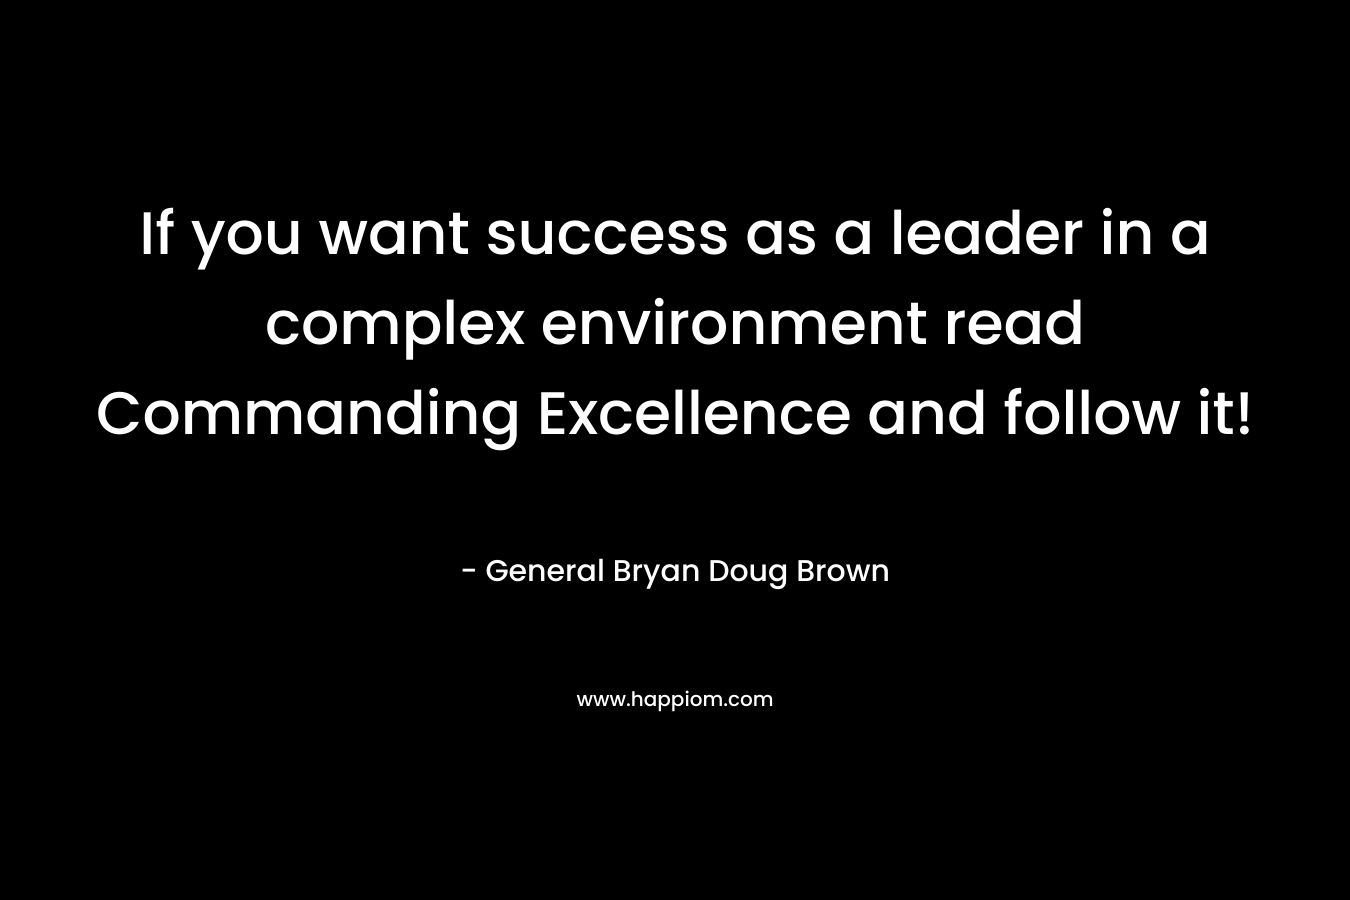 If you want success as a leader in a complex environment read Commanding Excellence and follow it! – General Bryan Doug Brown